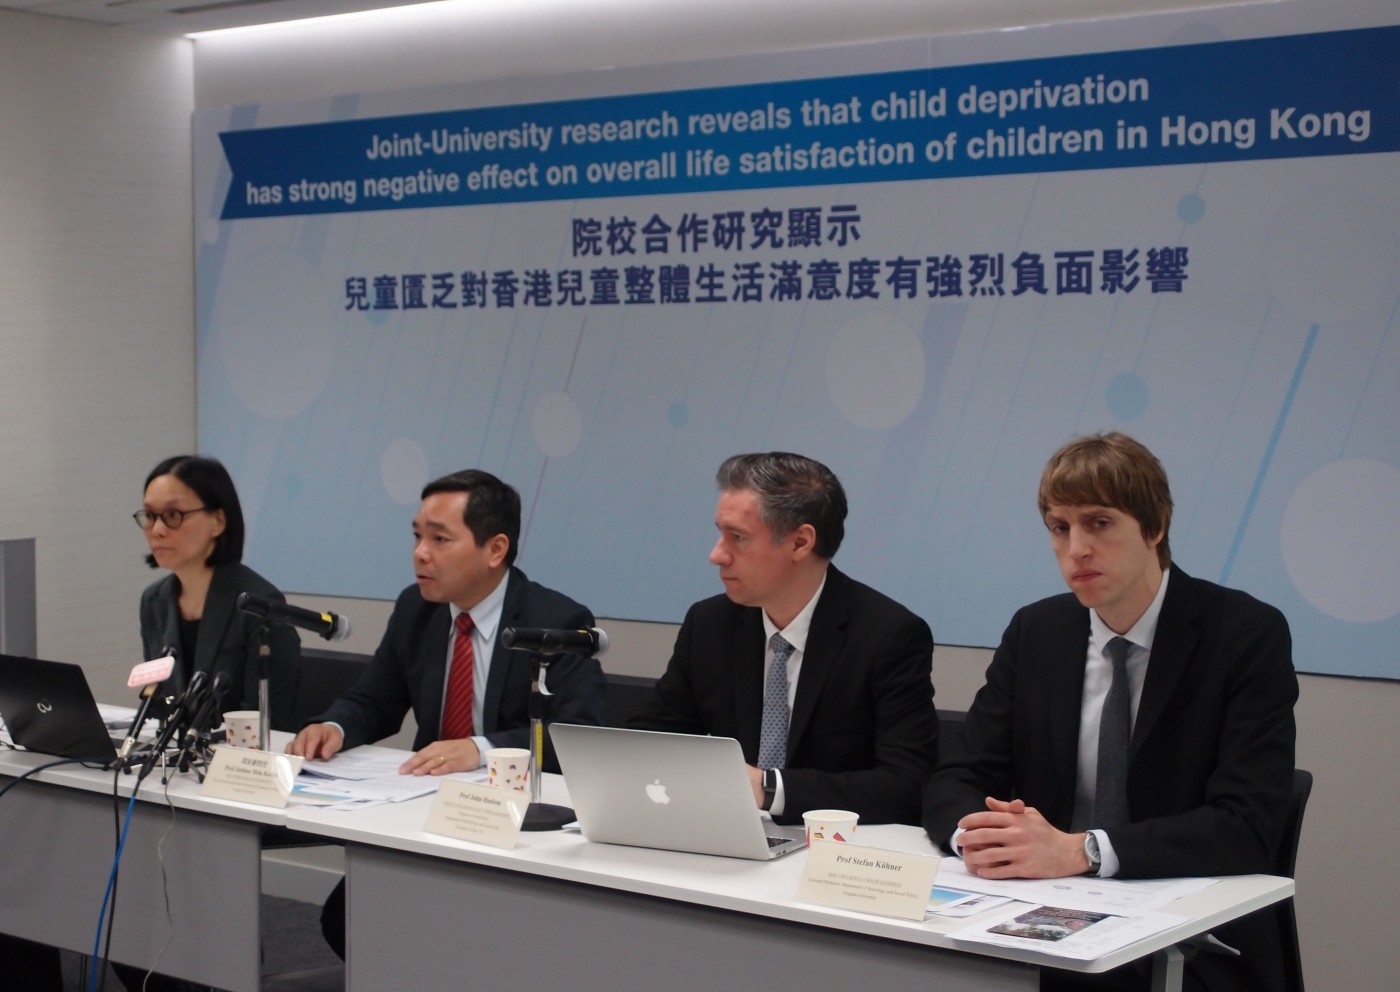 (From left) Dr Maggie Lau, Assistant Professor, Department of Public Policy, City University of Hong Kong, Prof Joshua Mok, Vice-President and Chair Professor of Comparative Policy, Lingnan University, Prof John Hudson, Professor of Social Policy, Departm